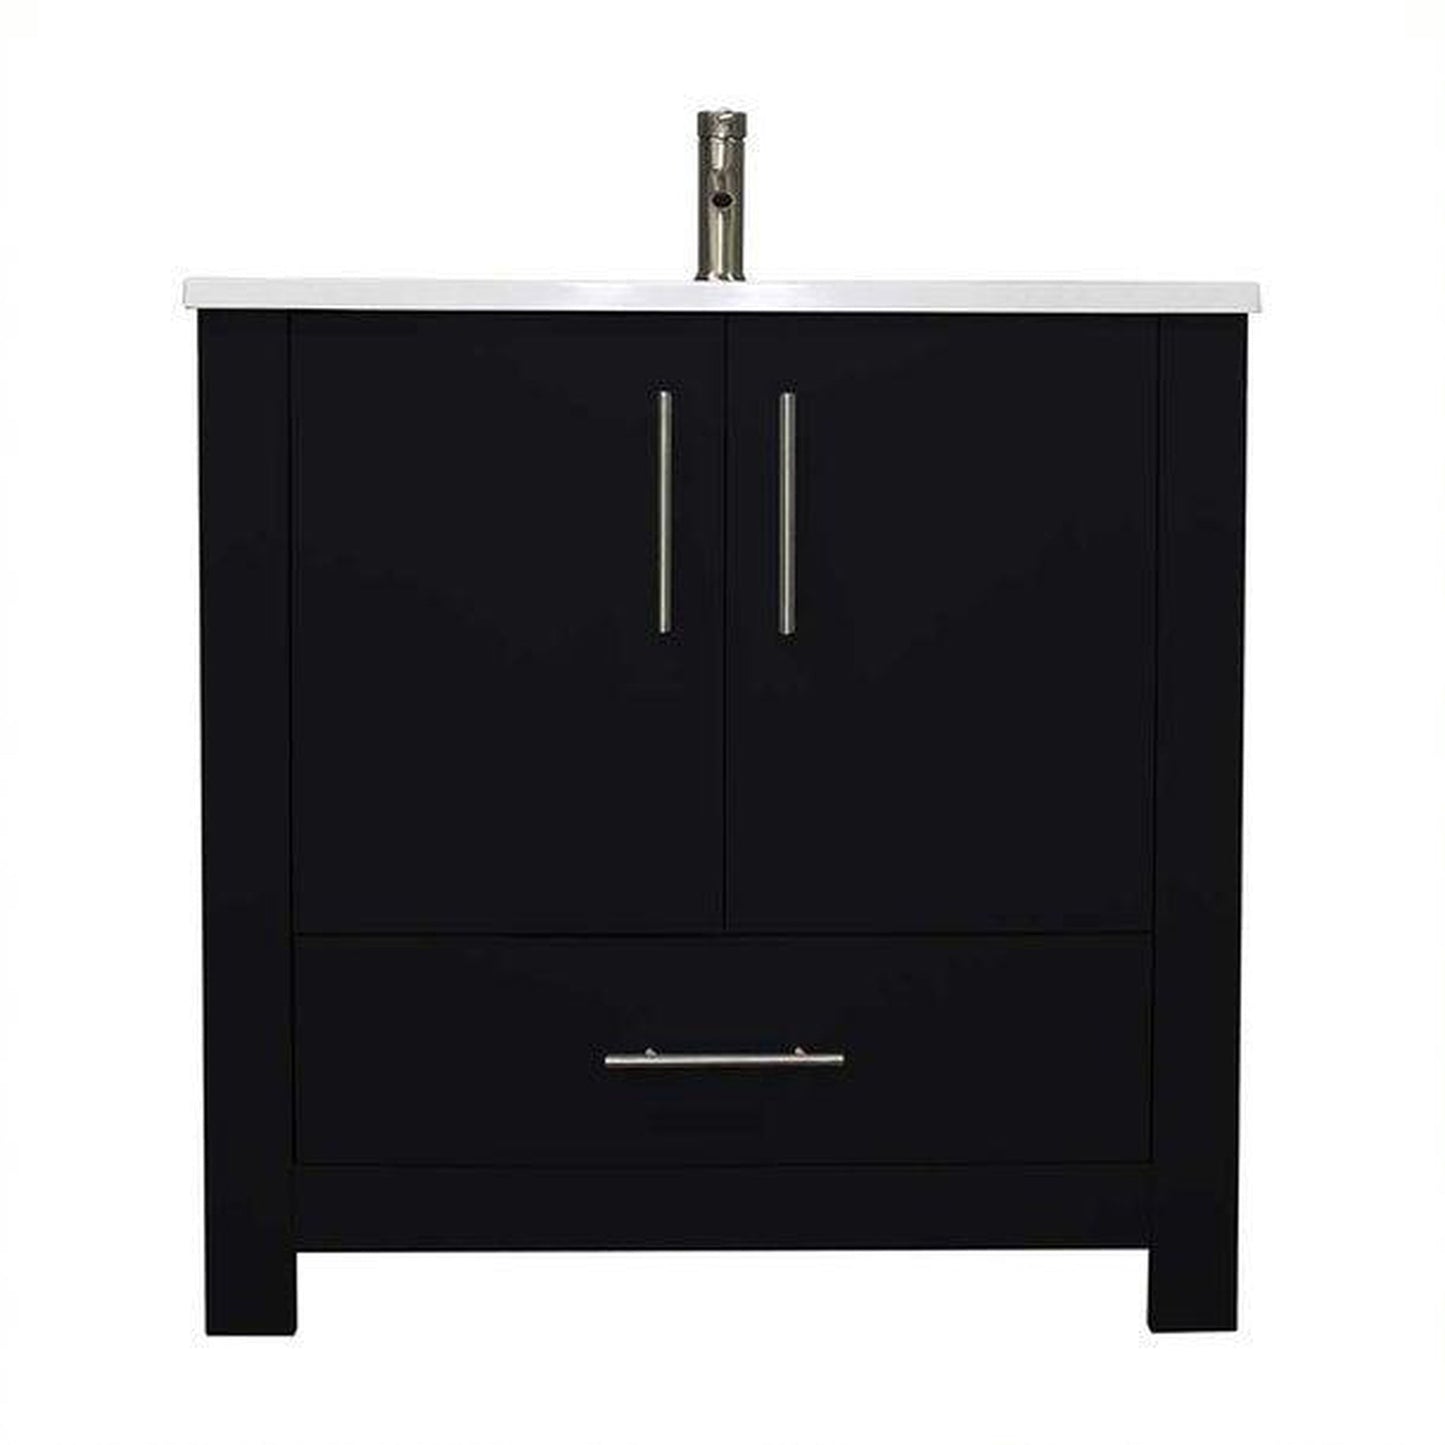 Volpa USA Boston 36" x 20" Glossy Black Modern Freestanding Bathroom Vanity With Acrylic Top, Integrated Acrylic Sink And Brushed Nickel Handles